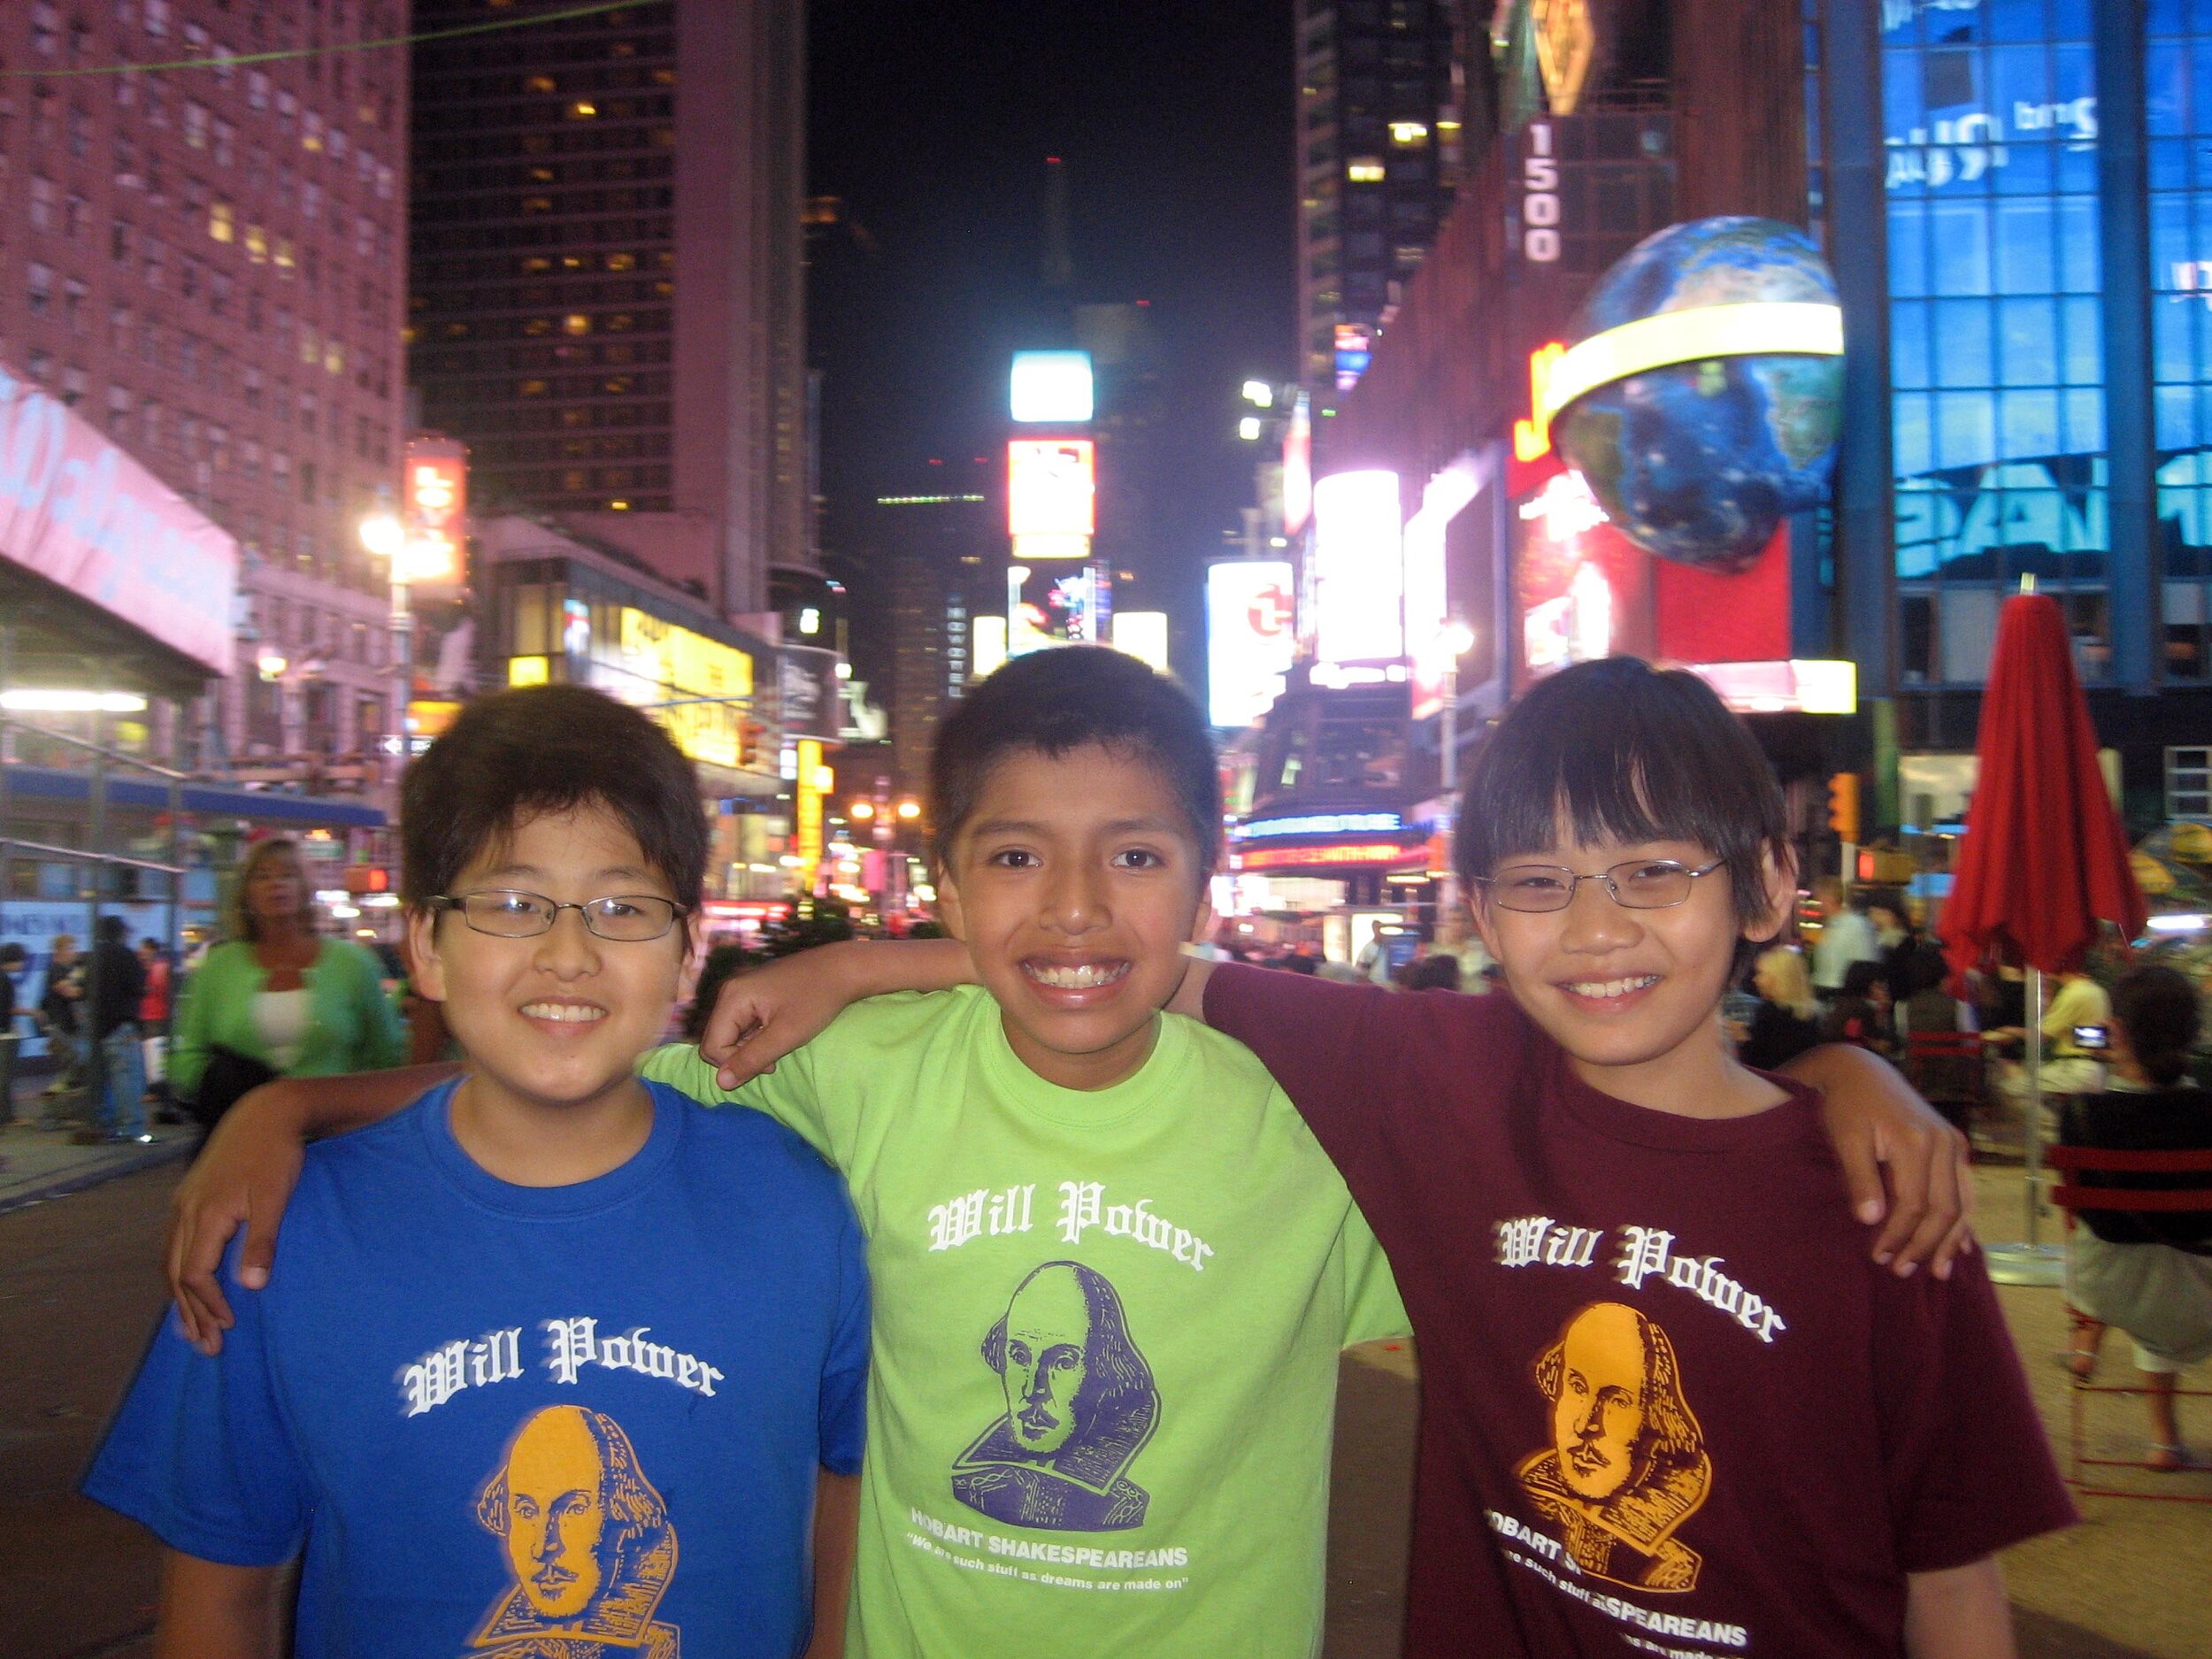  Times Square before New York City show 